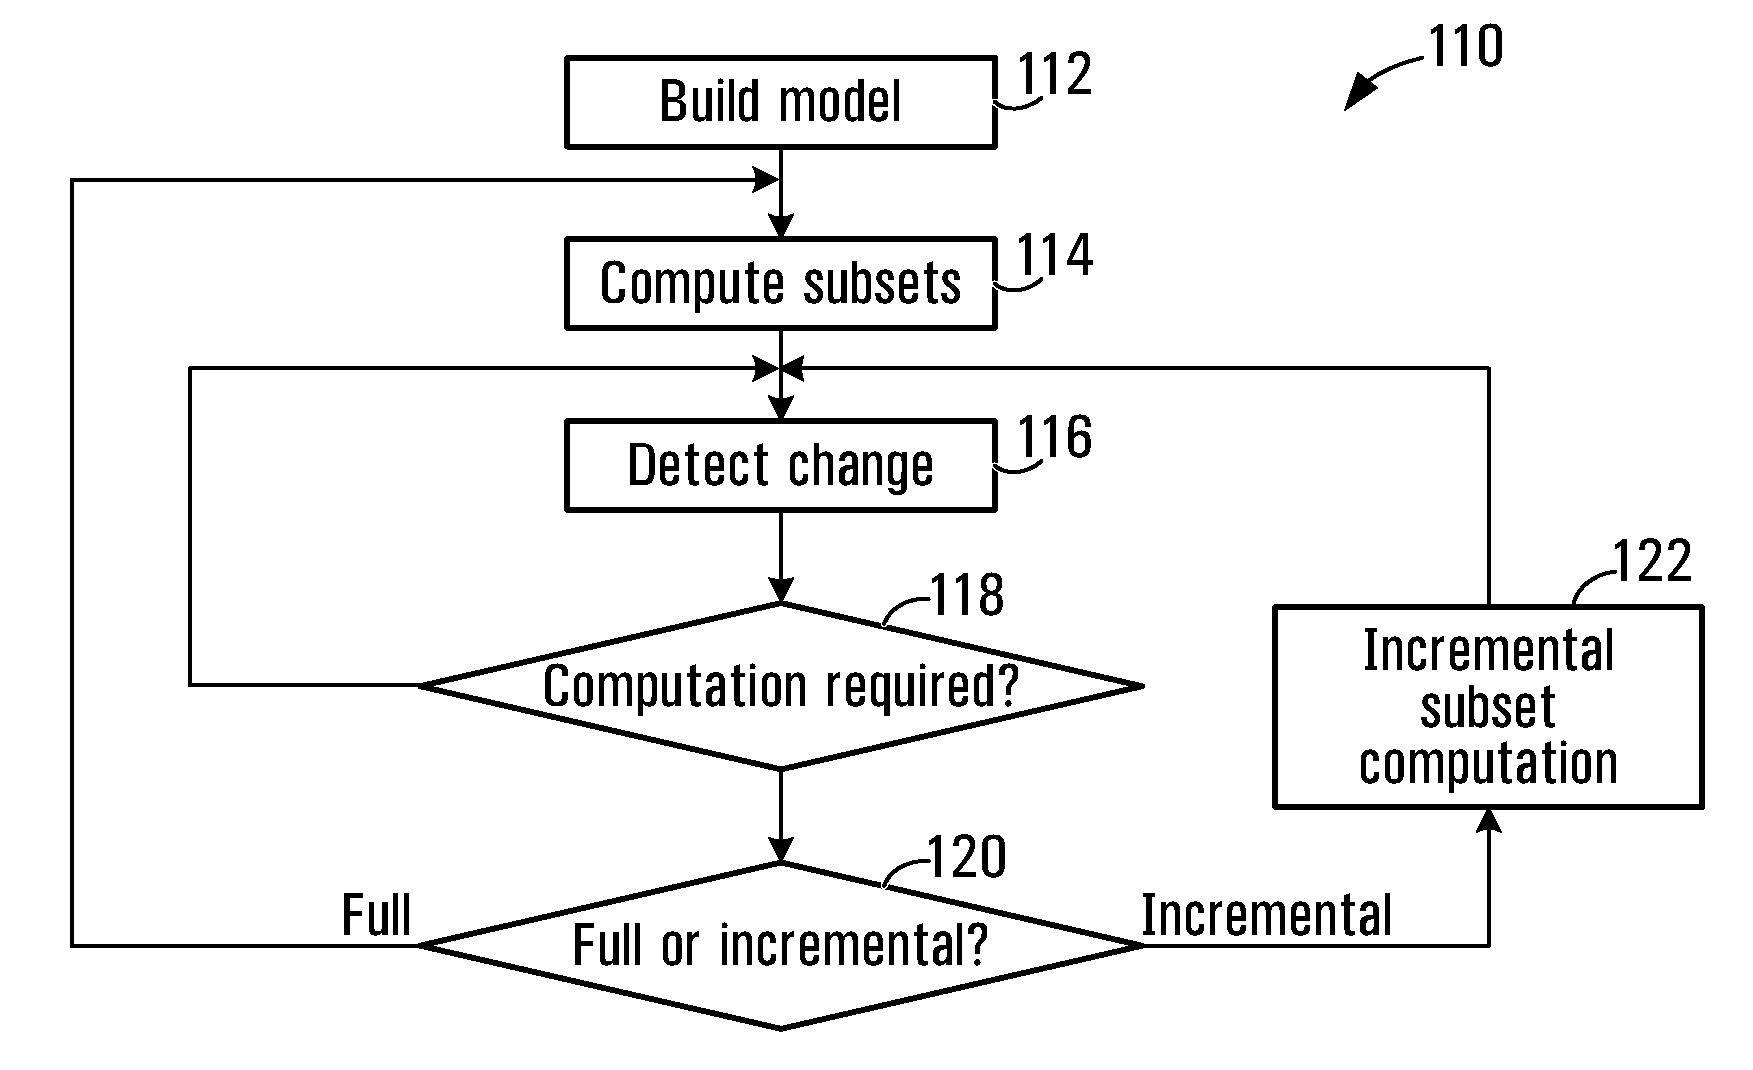 Graph-based modeling apparatus and techniques